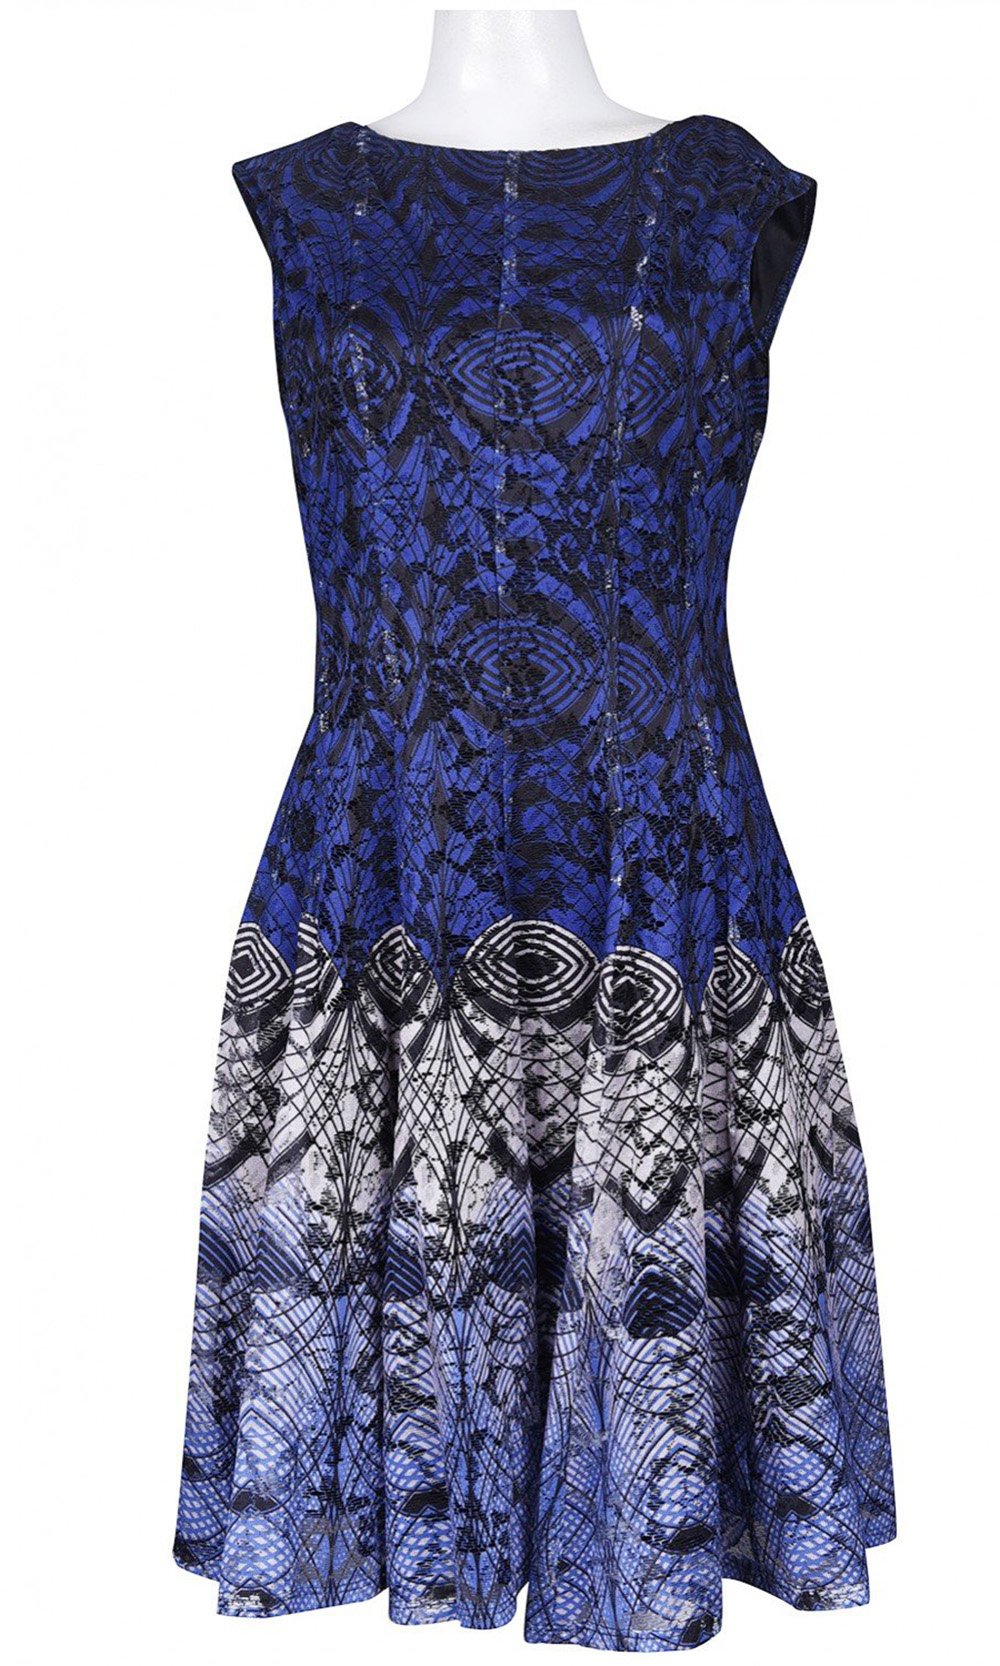 Gabby Skye - 56339MG Multi-Print Gradient Knit Lace A-Line Dress In Blue and Multi-Color